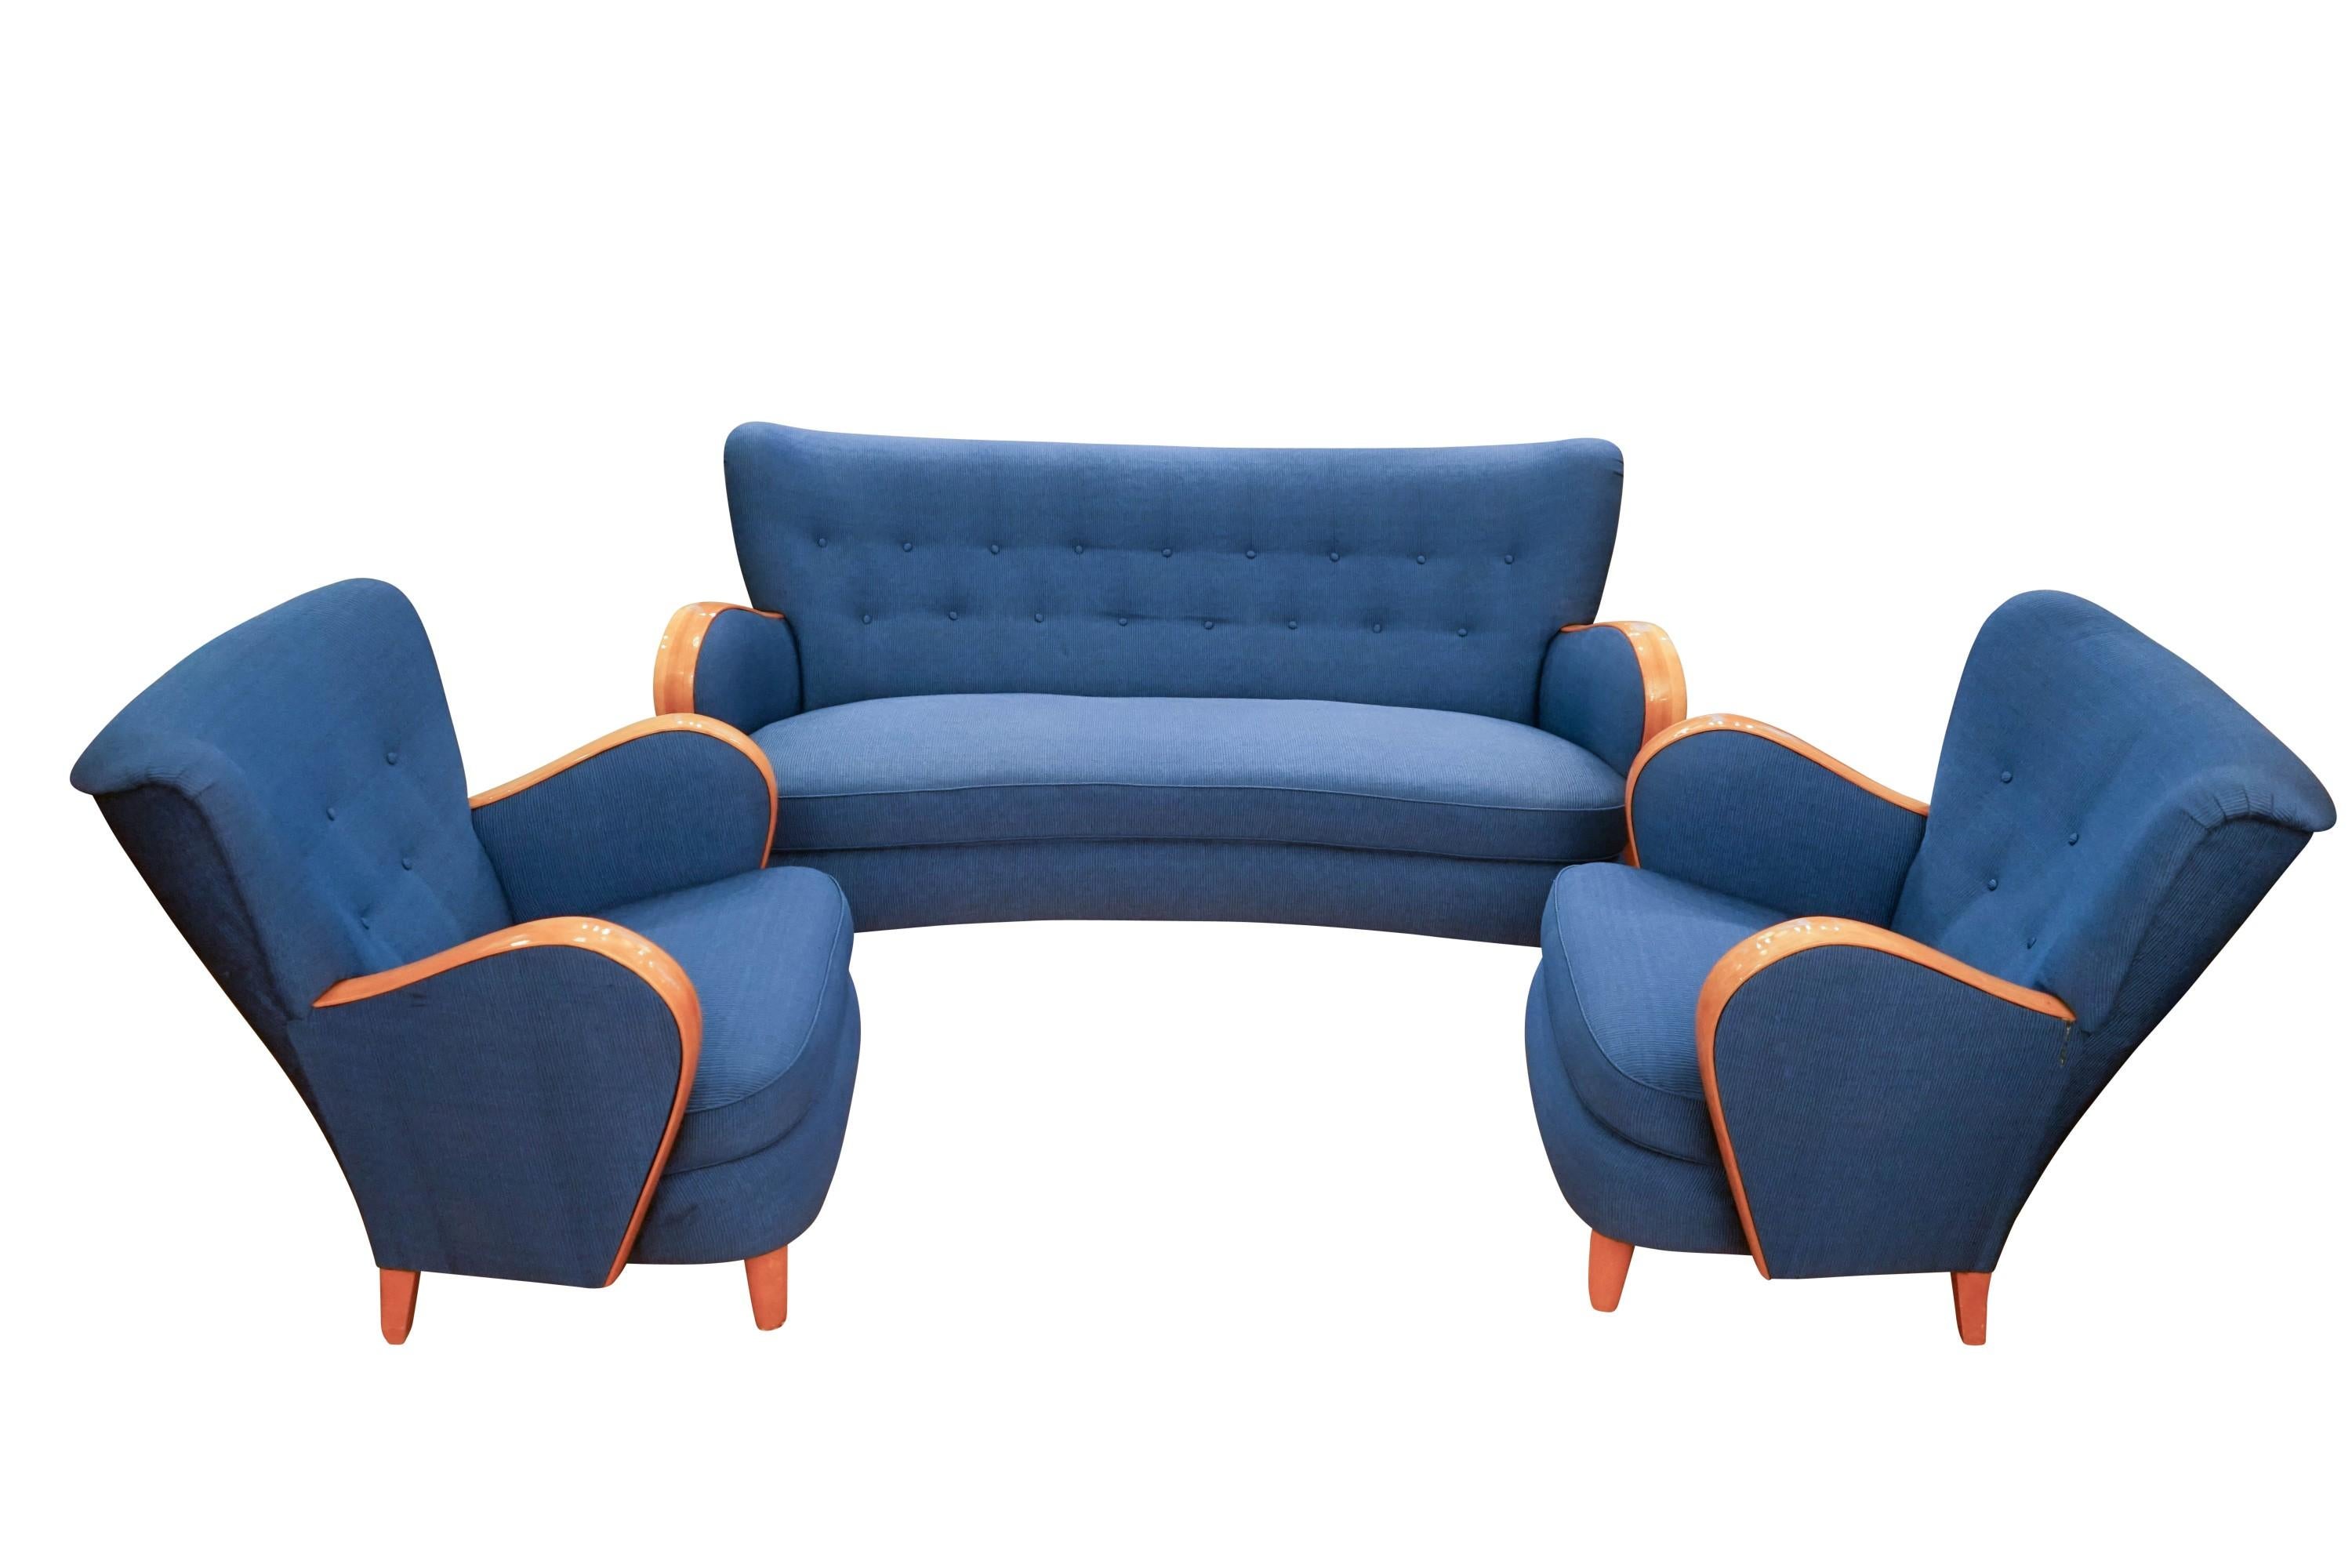 A curved, tailored sofa with swing, is complemented by a pair of matching extremely comfortable chairs. The comfort is due, in part, to the hand tailoring of the sofa and chair backs with strategically placed flat buttons which remove unnecessary